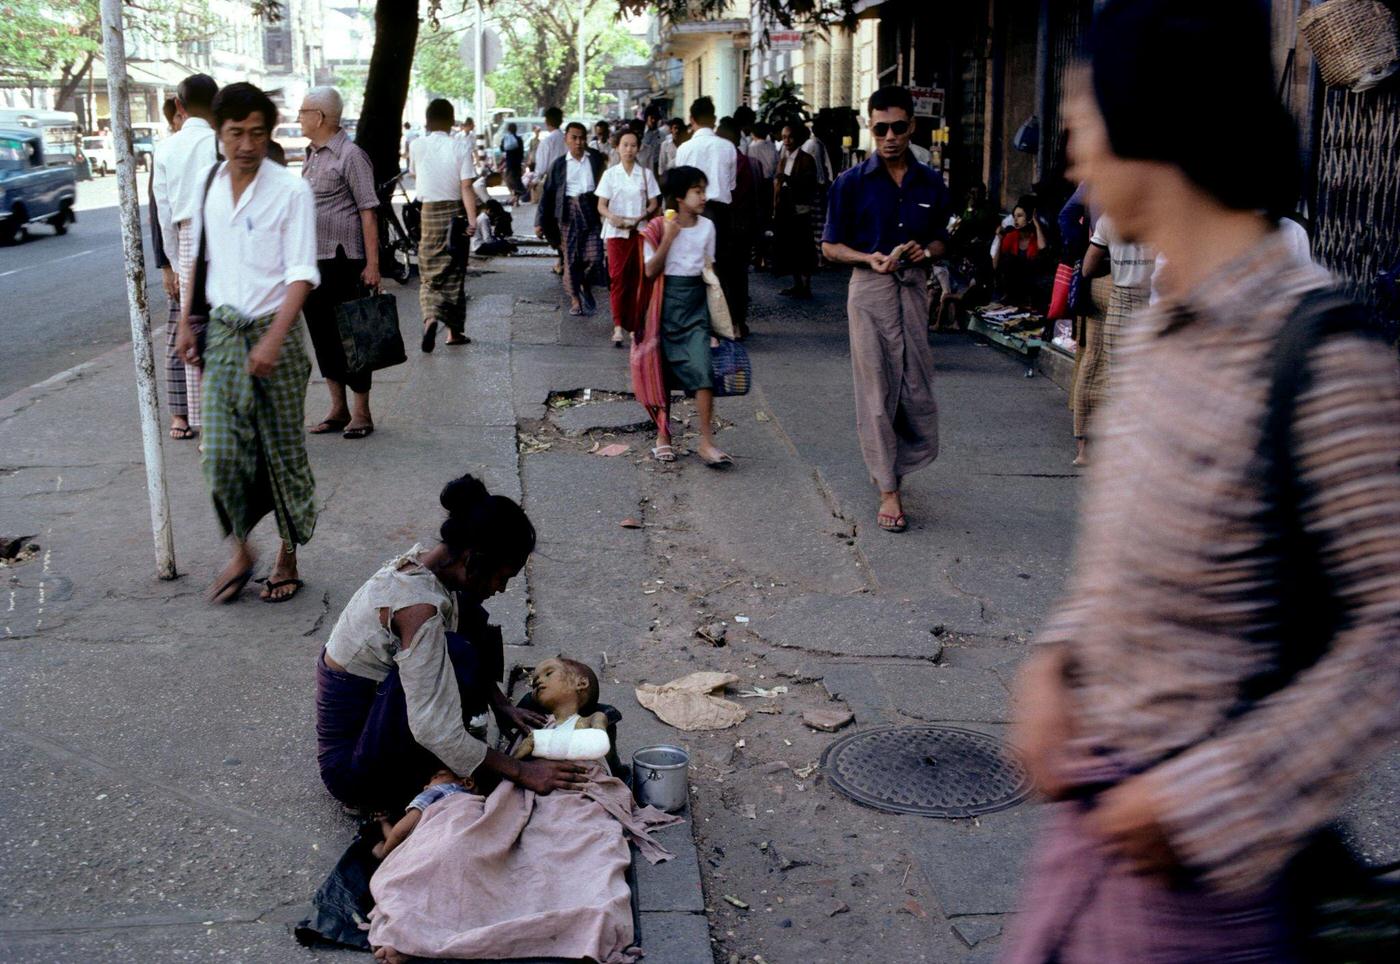 Poverty-Stricken Mother Comforts Malnourished Injured Child While Begging in Rangoon, Burma, 1985